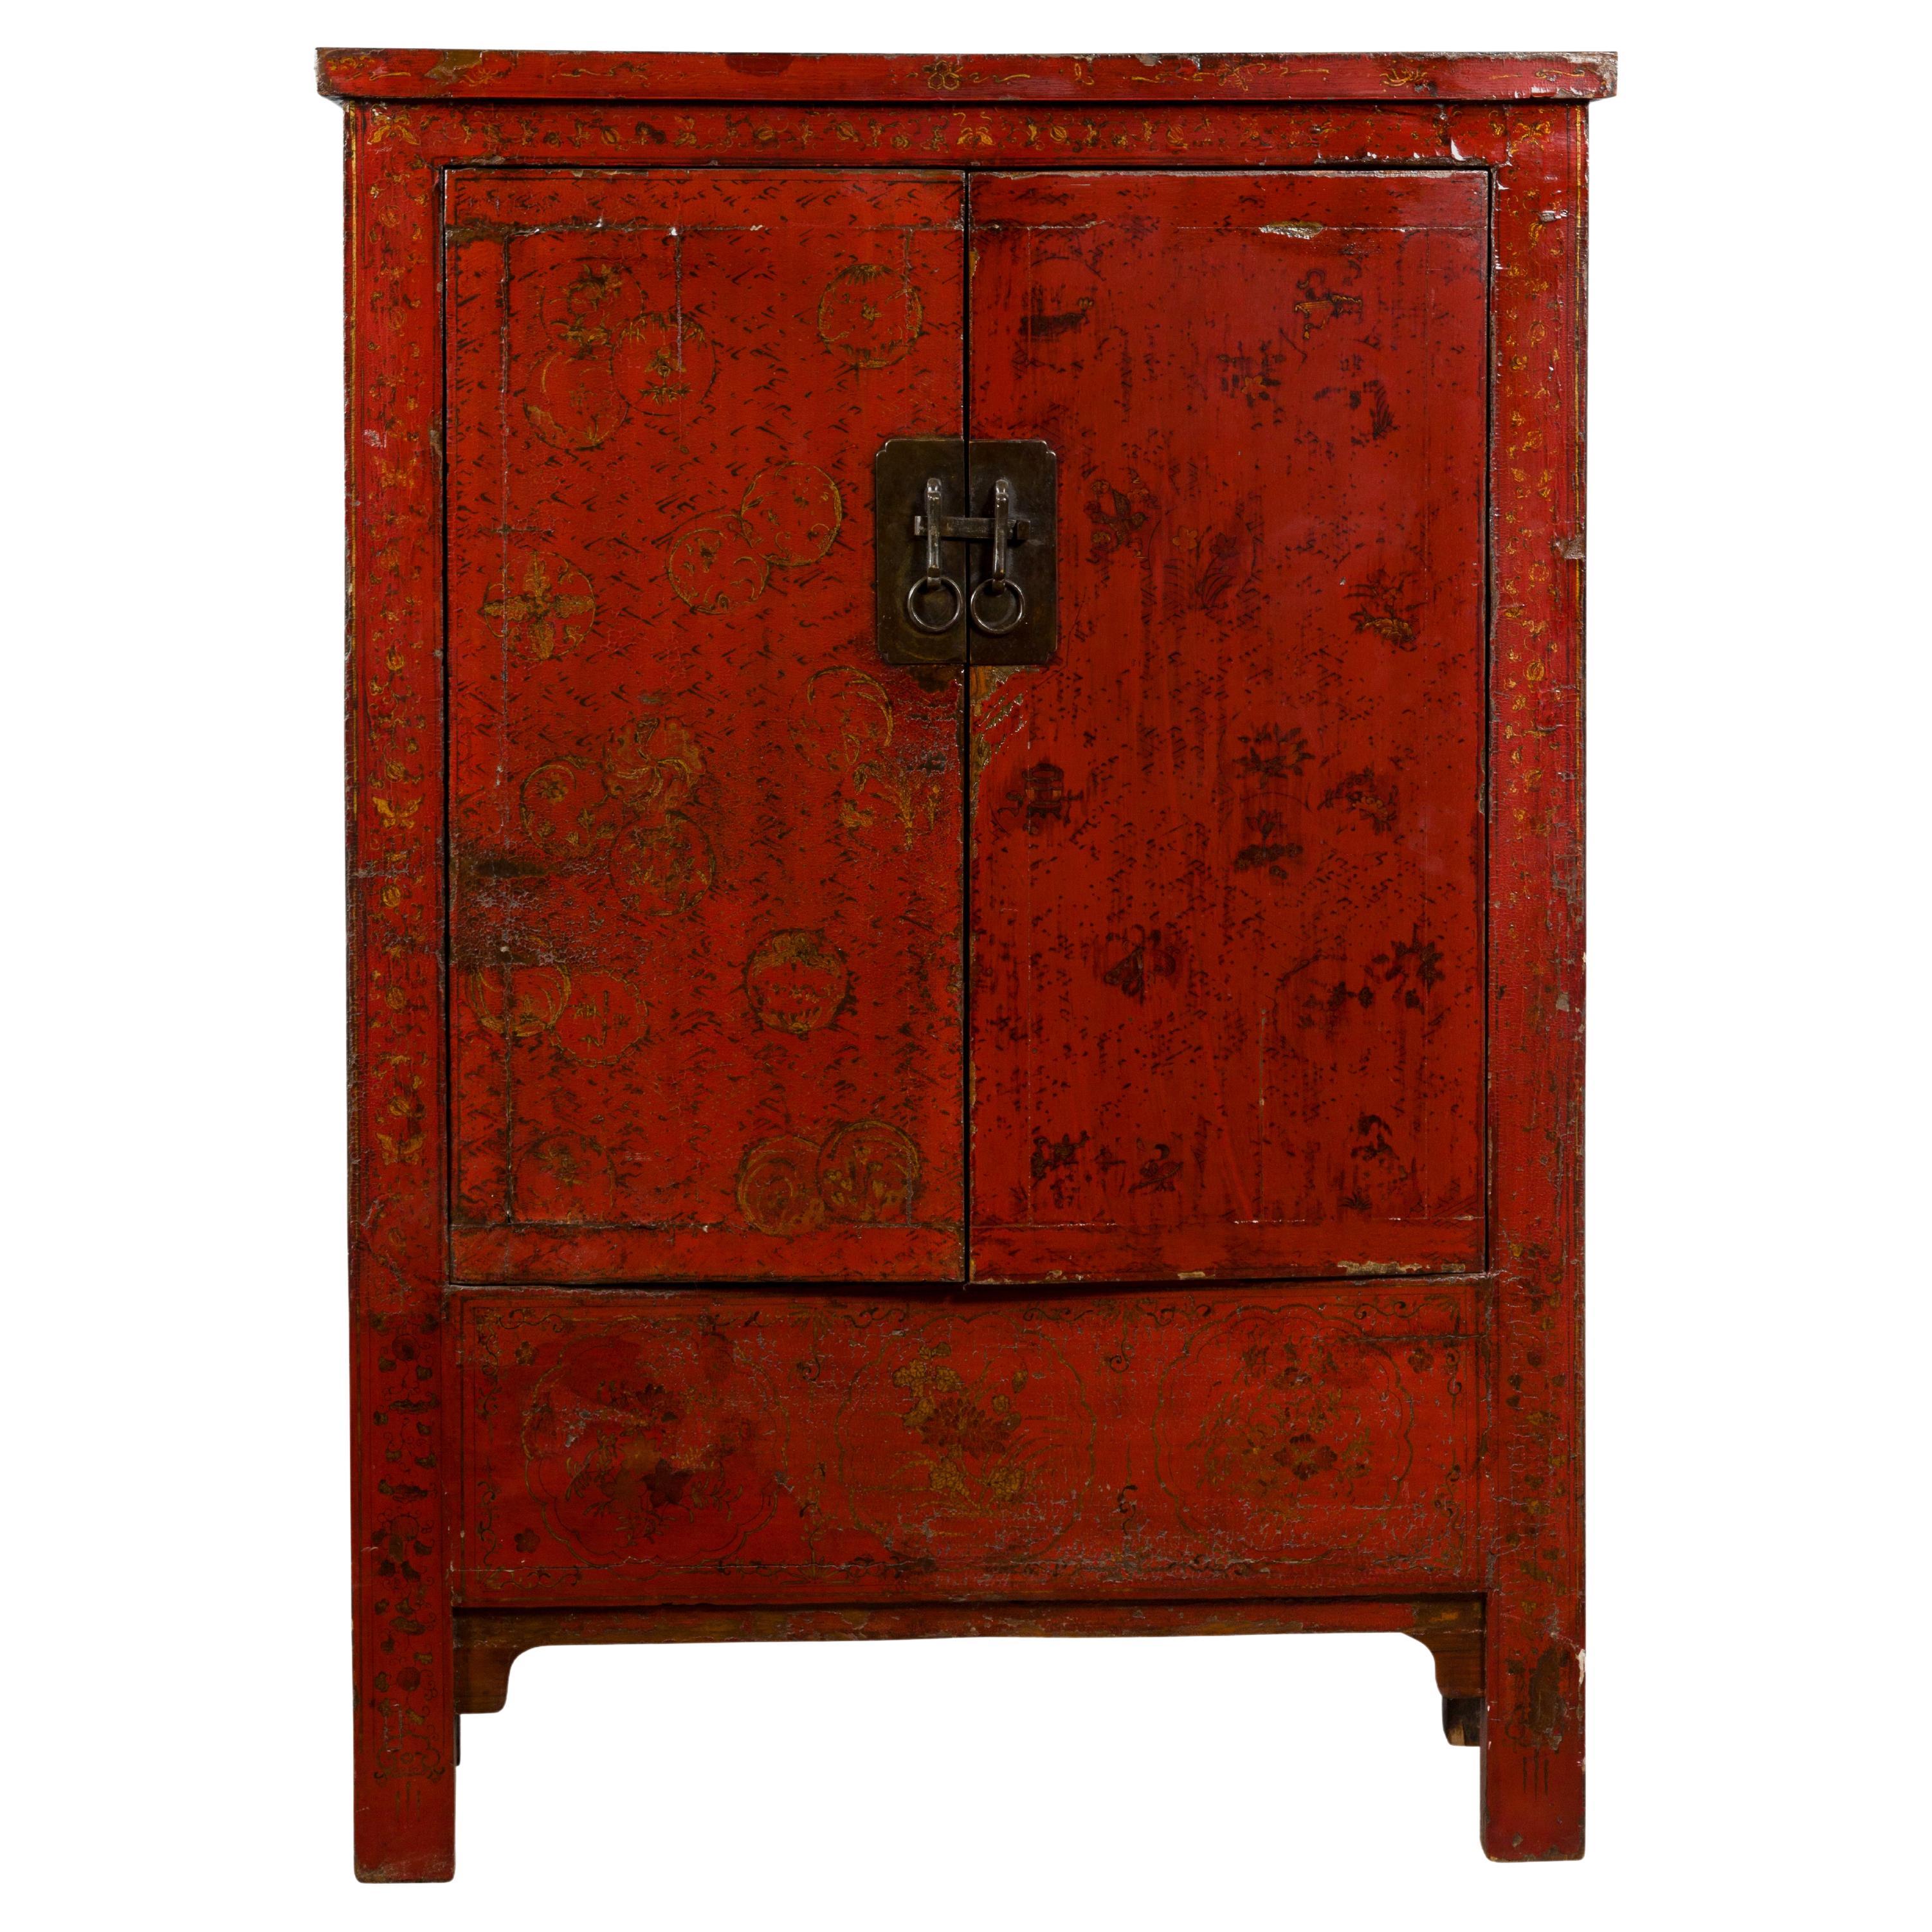 Qing Dynasty Period 19th Century Red Lacquer Shanxi Cabinet with Floral Décor For Sale